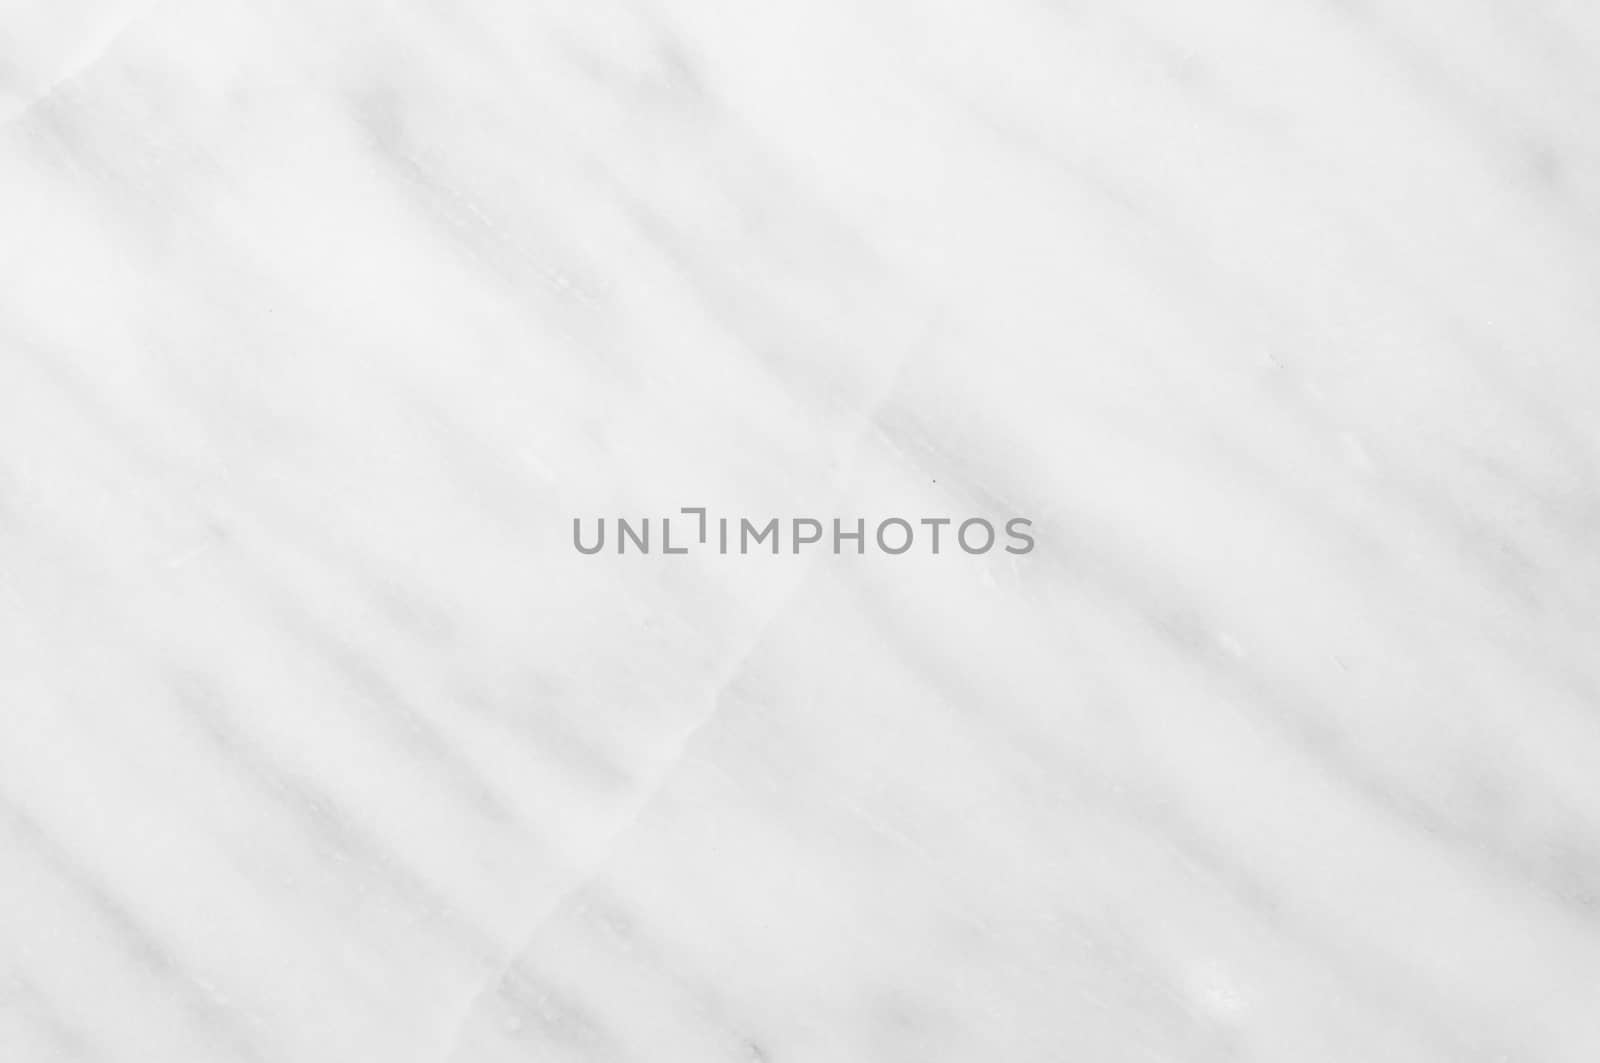 White marble wall patterned texture for background luxurious design concept